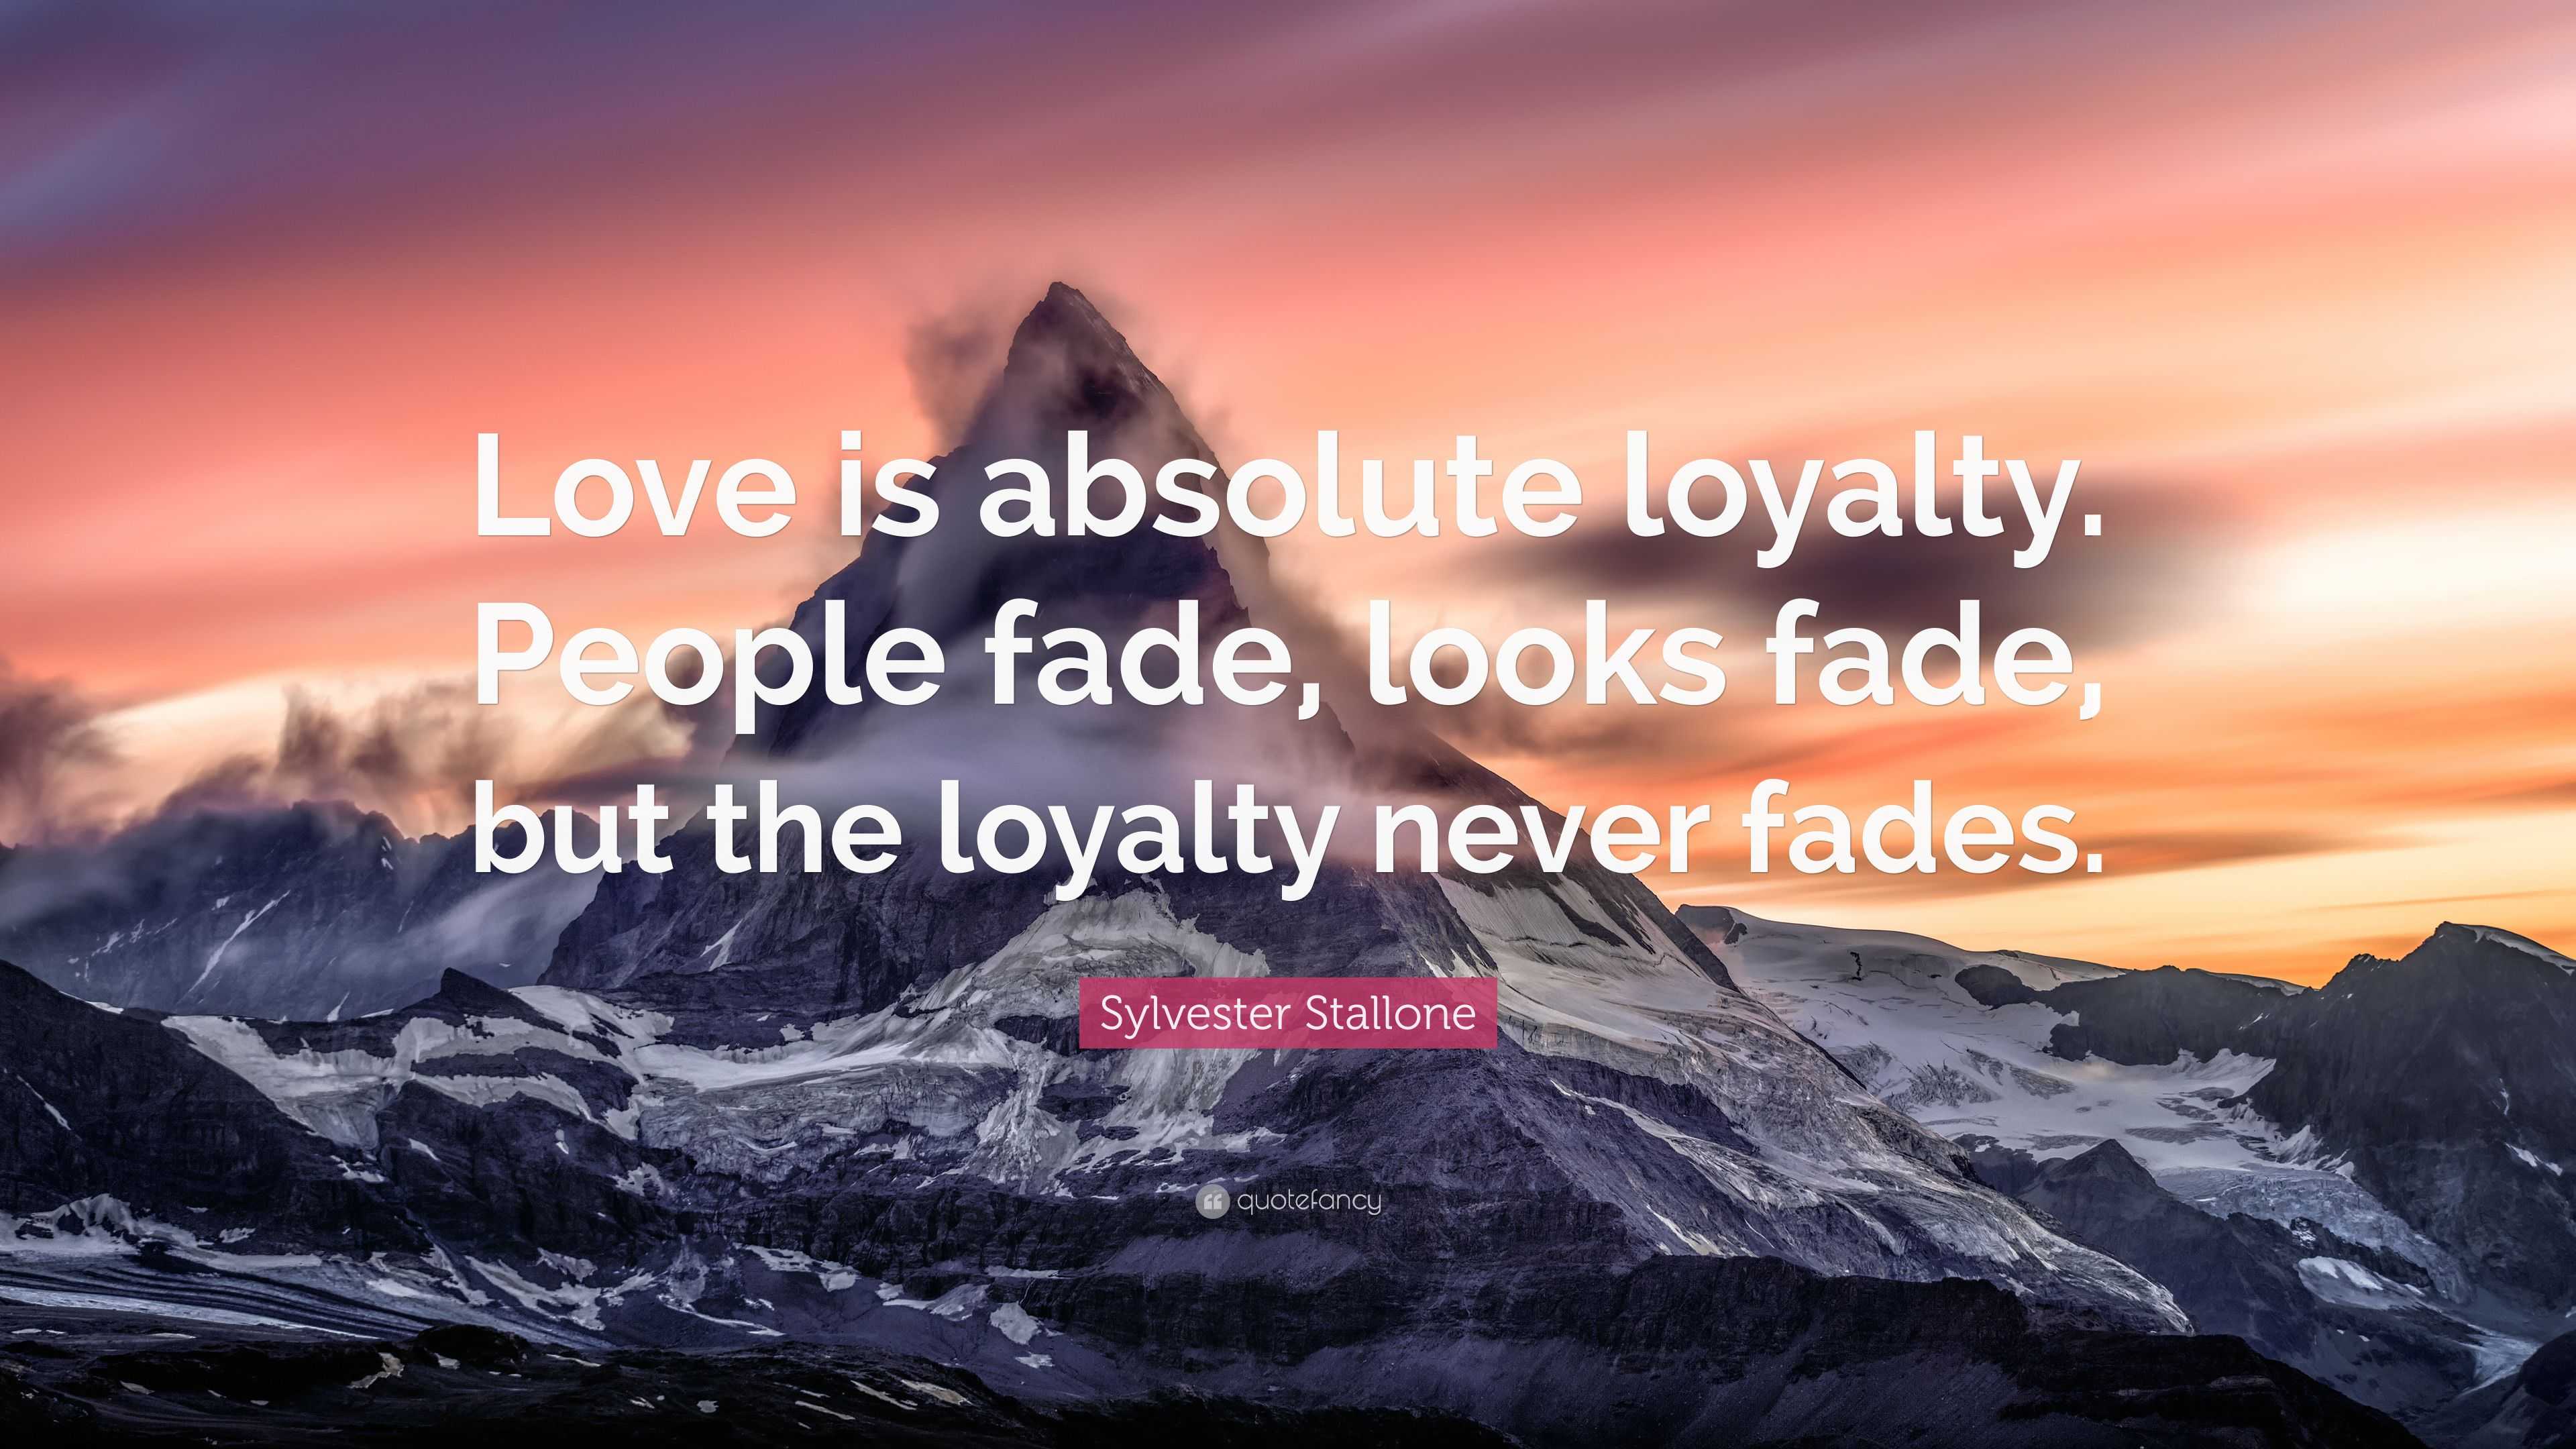 Sylvester Stallone Quote “Love is absolute loyalty People fade looks fade